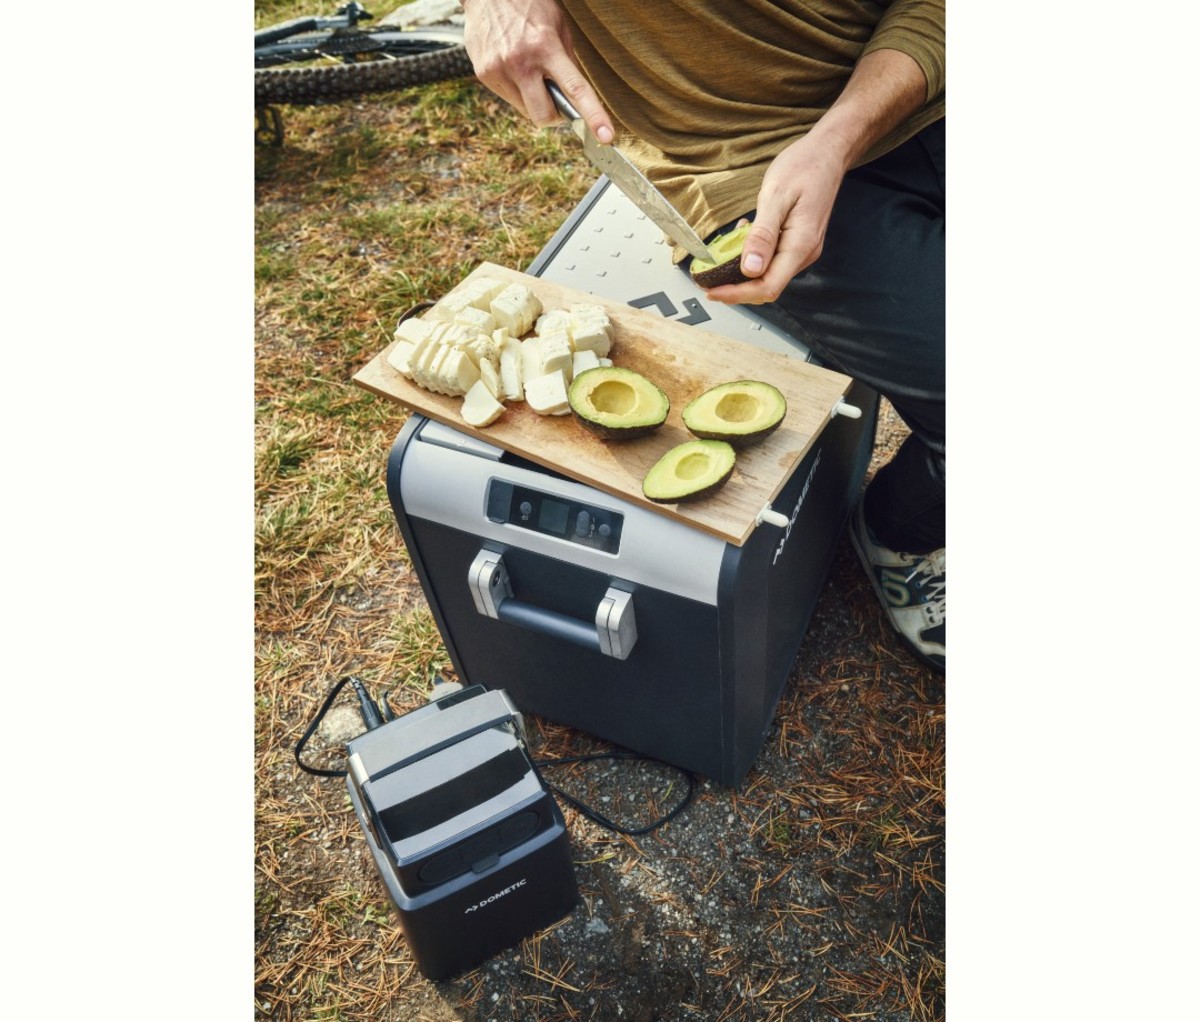 Man sitting on powered cooler with attached battery pack and avocados on cutting board